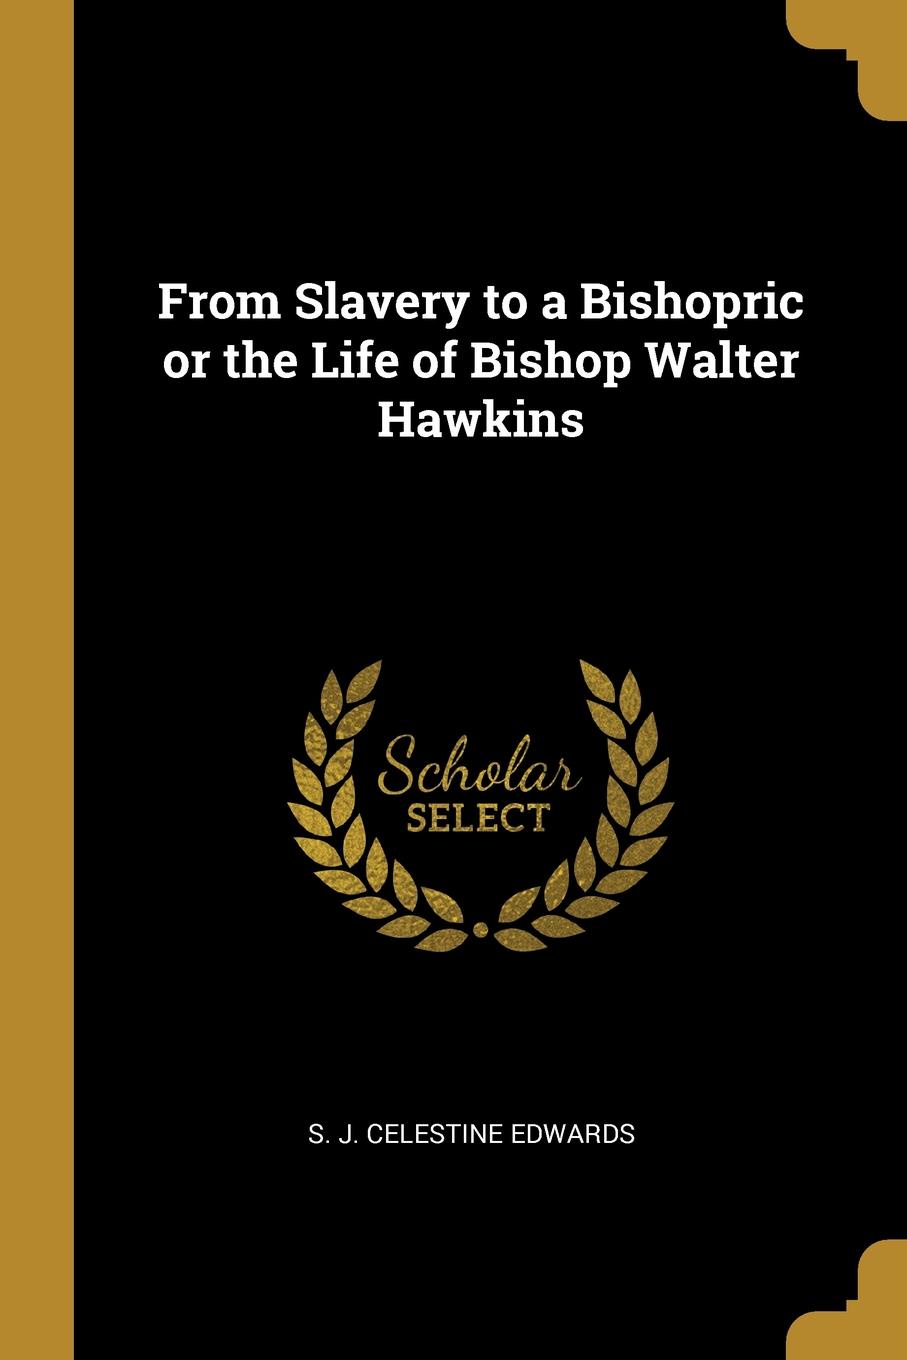 From Slavery to a Bishopric or the Life of Bishop Walter Hawkins